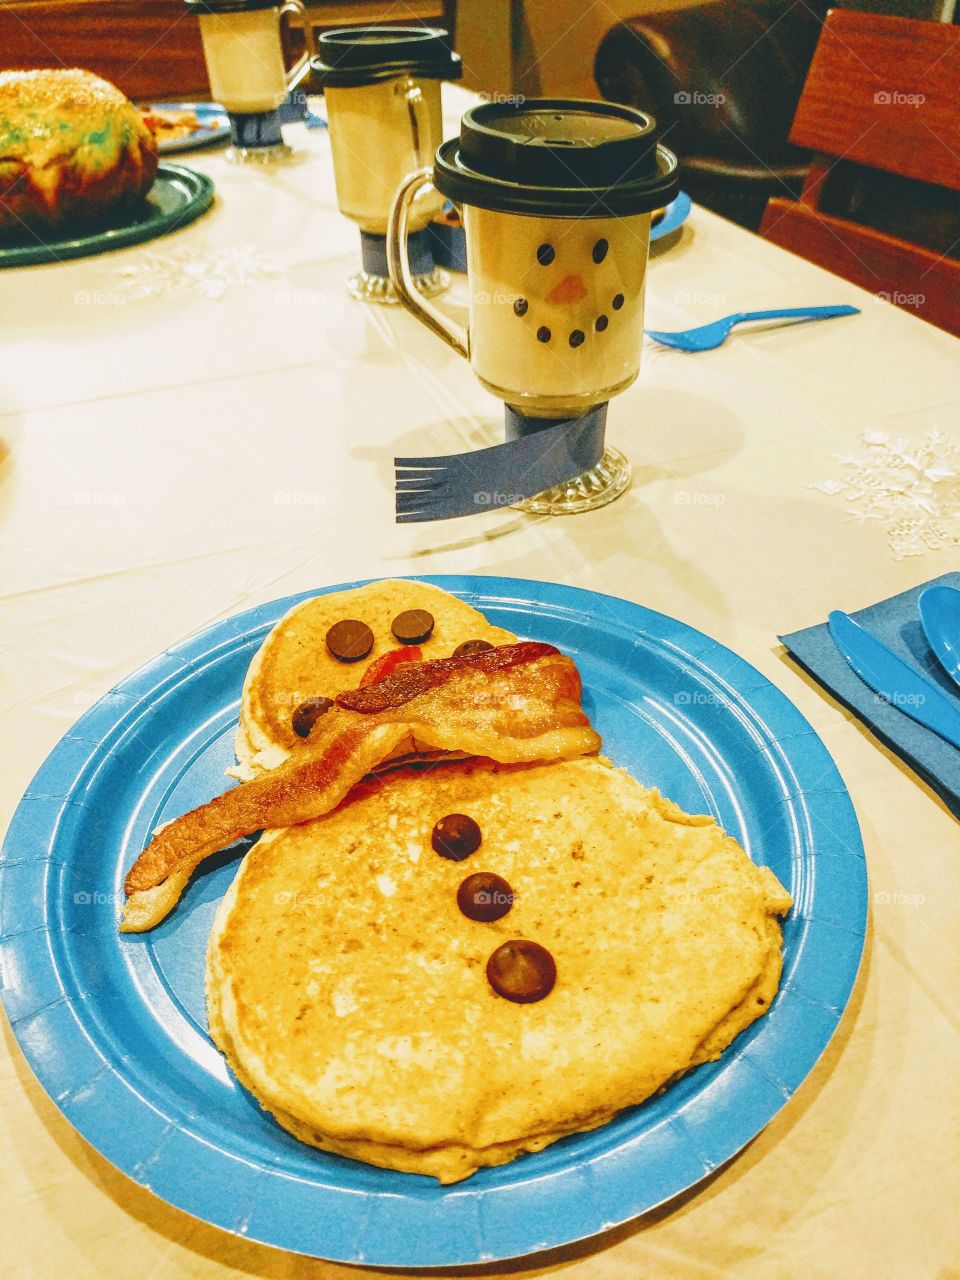 snowman pancakes with a snowman mugs of white hot chocolate